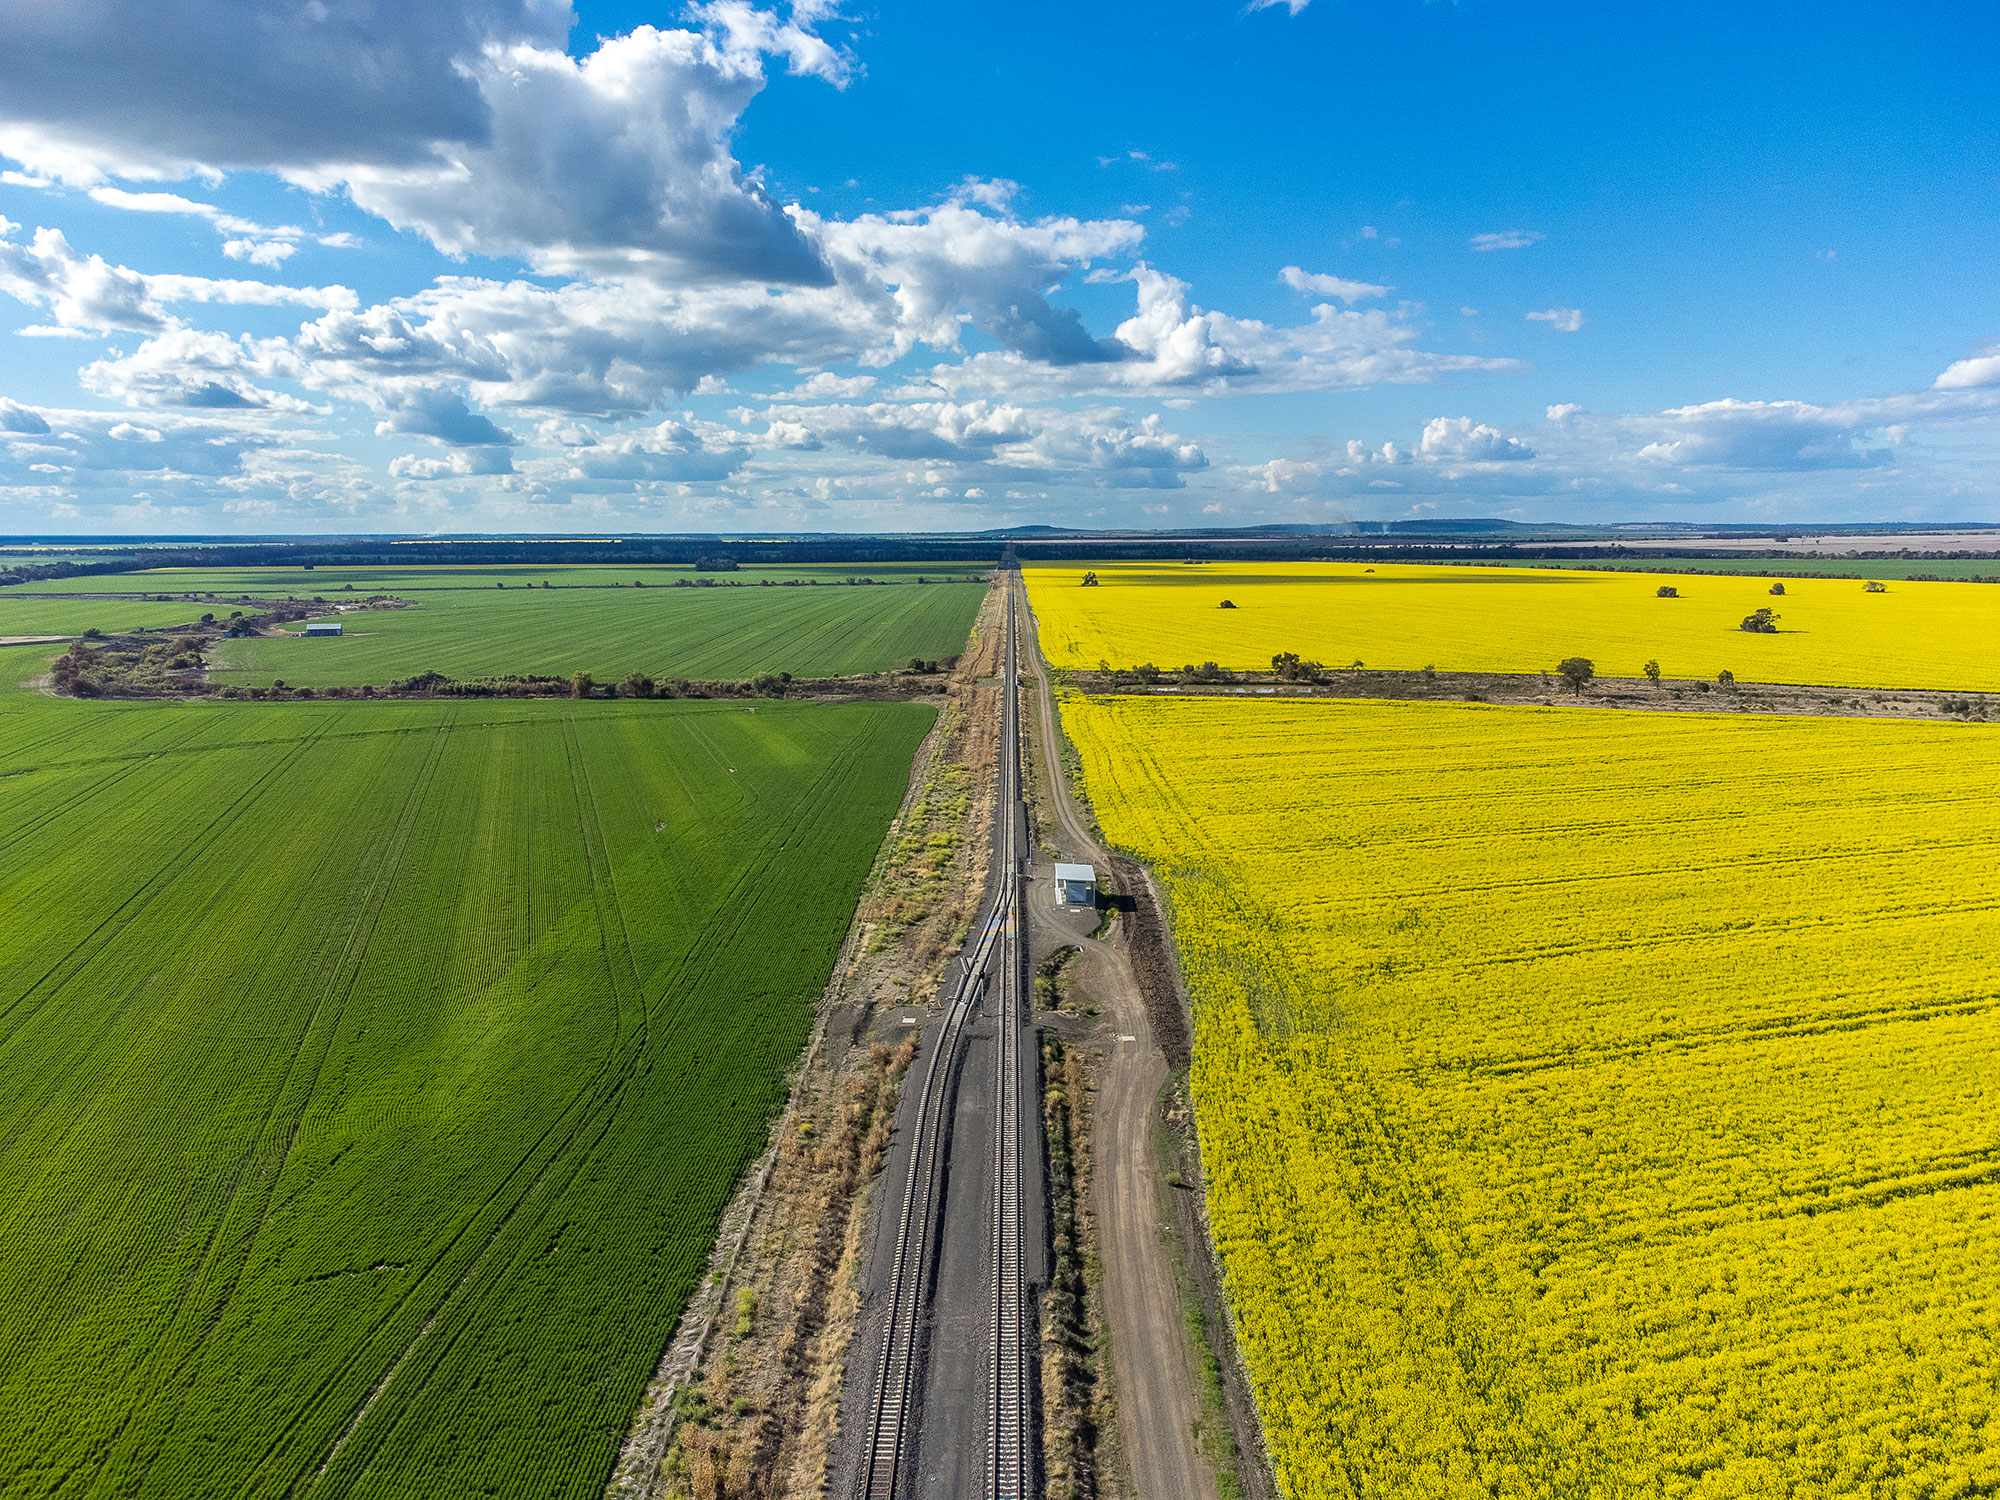 Aerial image showing canola fields north of Milguy, NSW